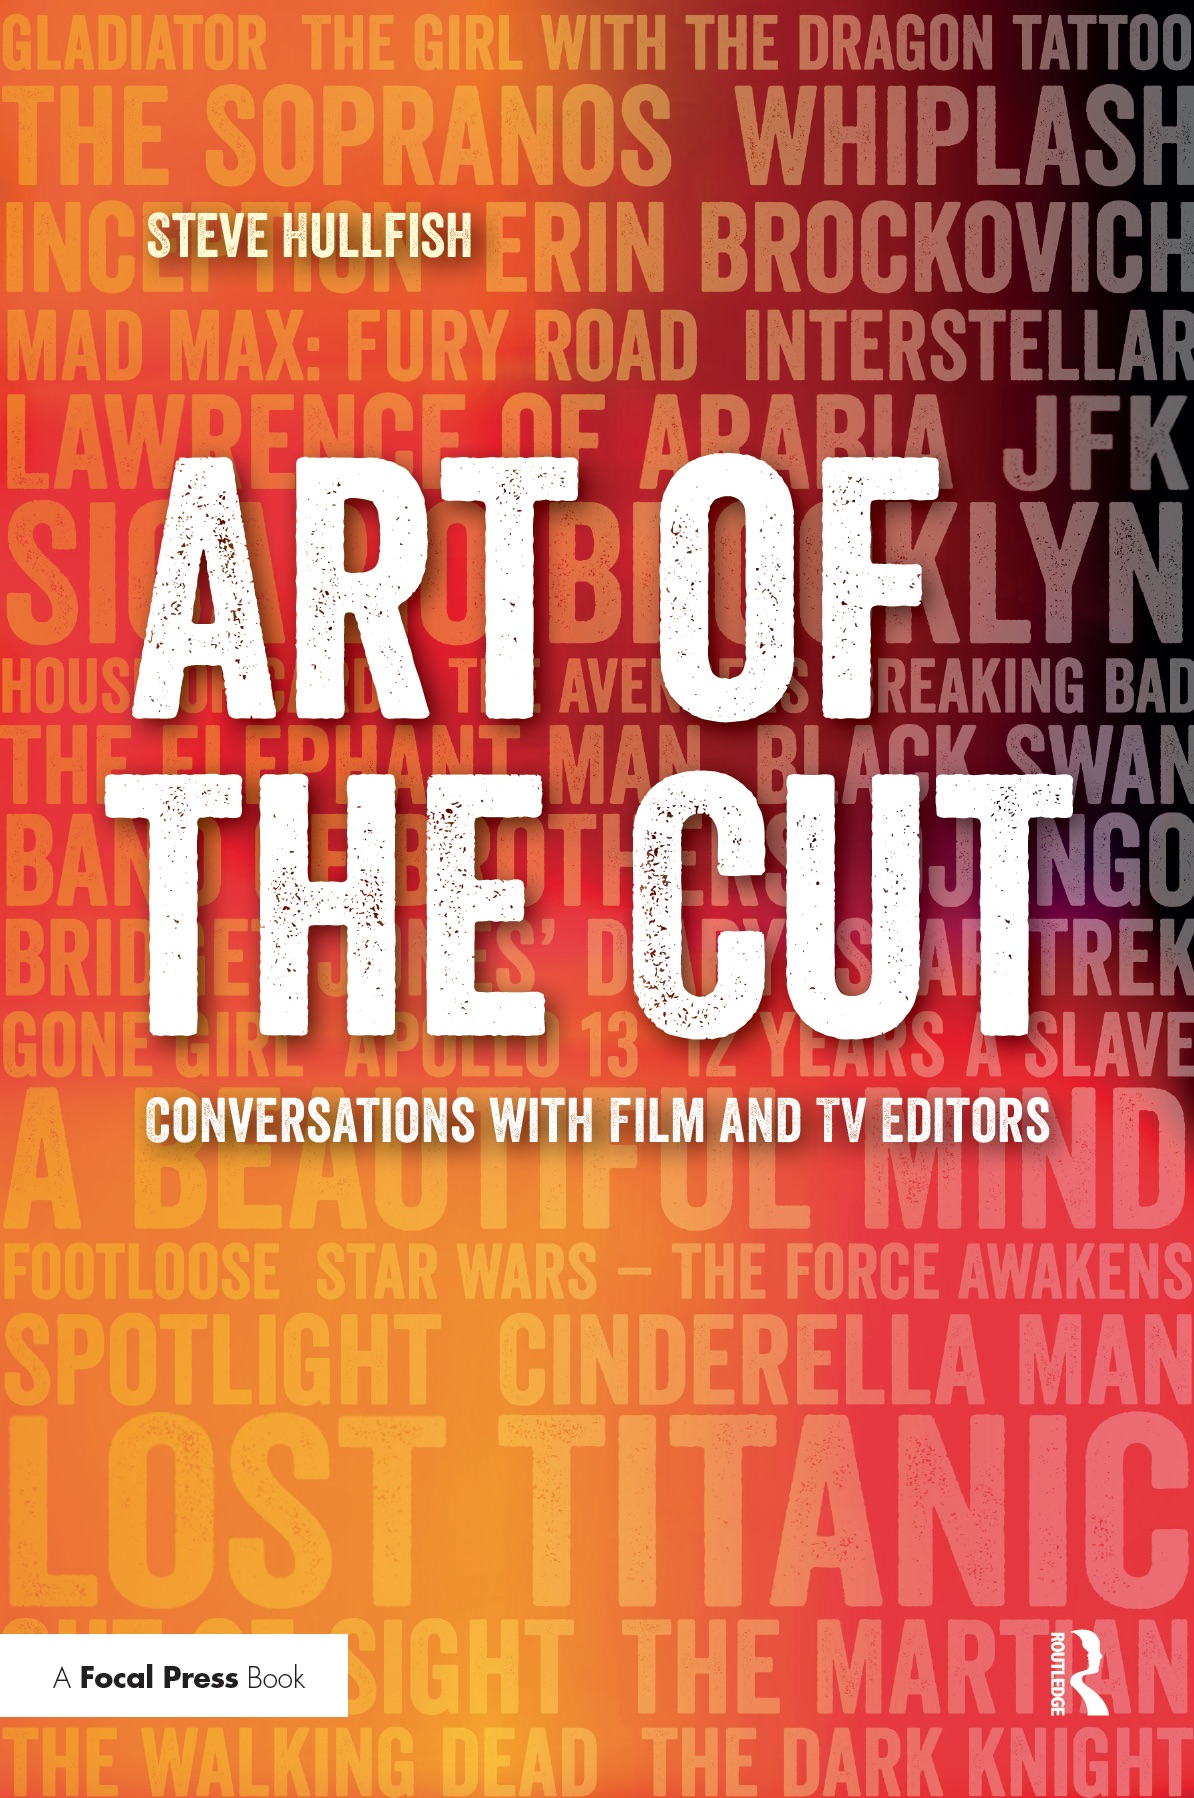 ART OF THE CUT with Melissa Kent of on editing "Traffik" 6